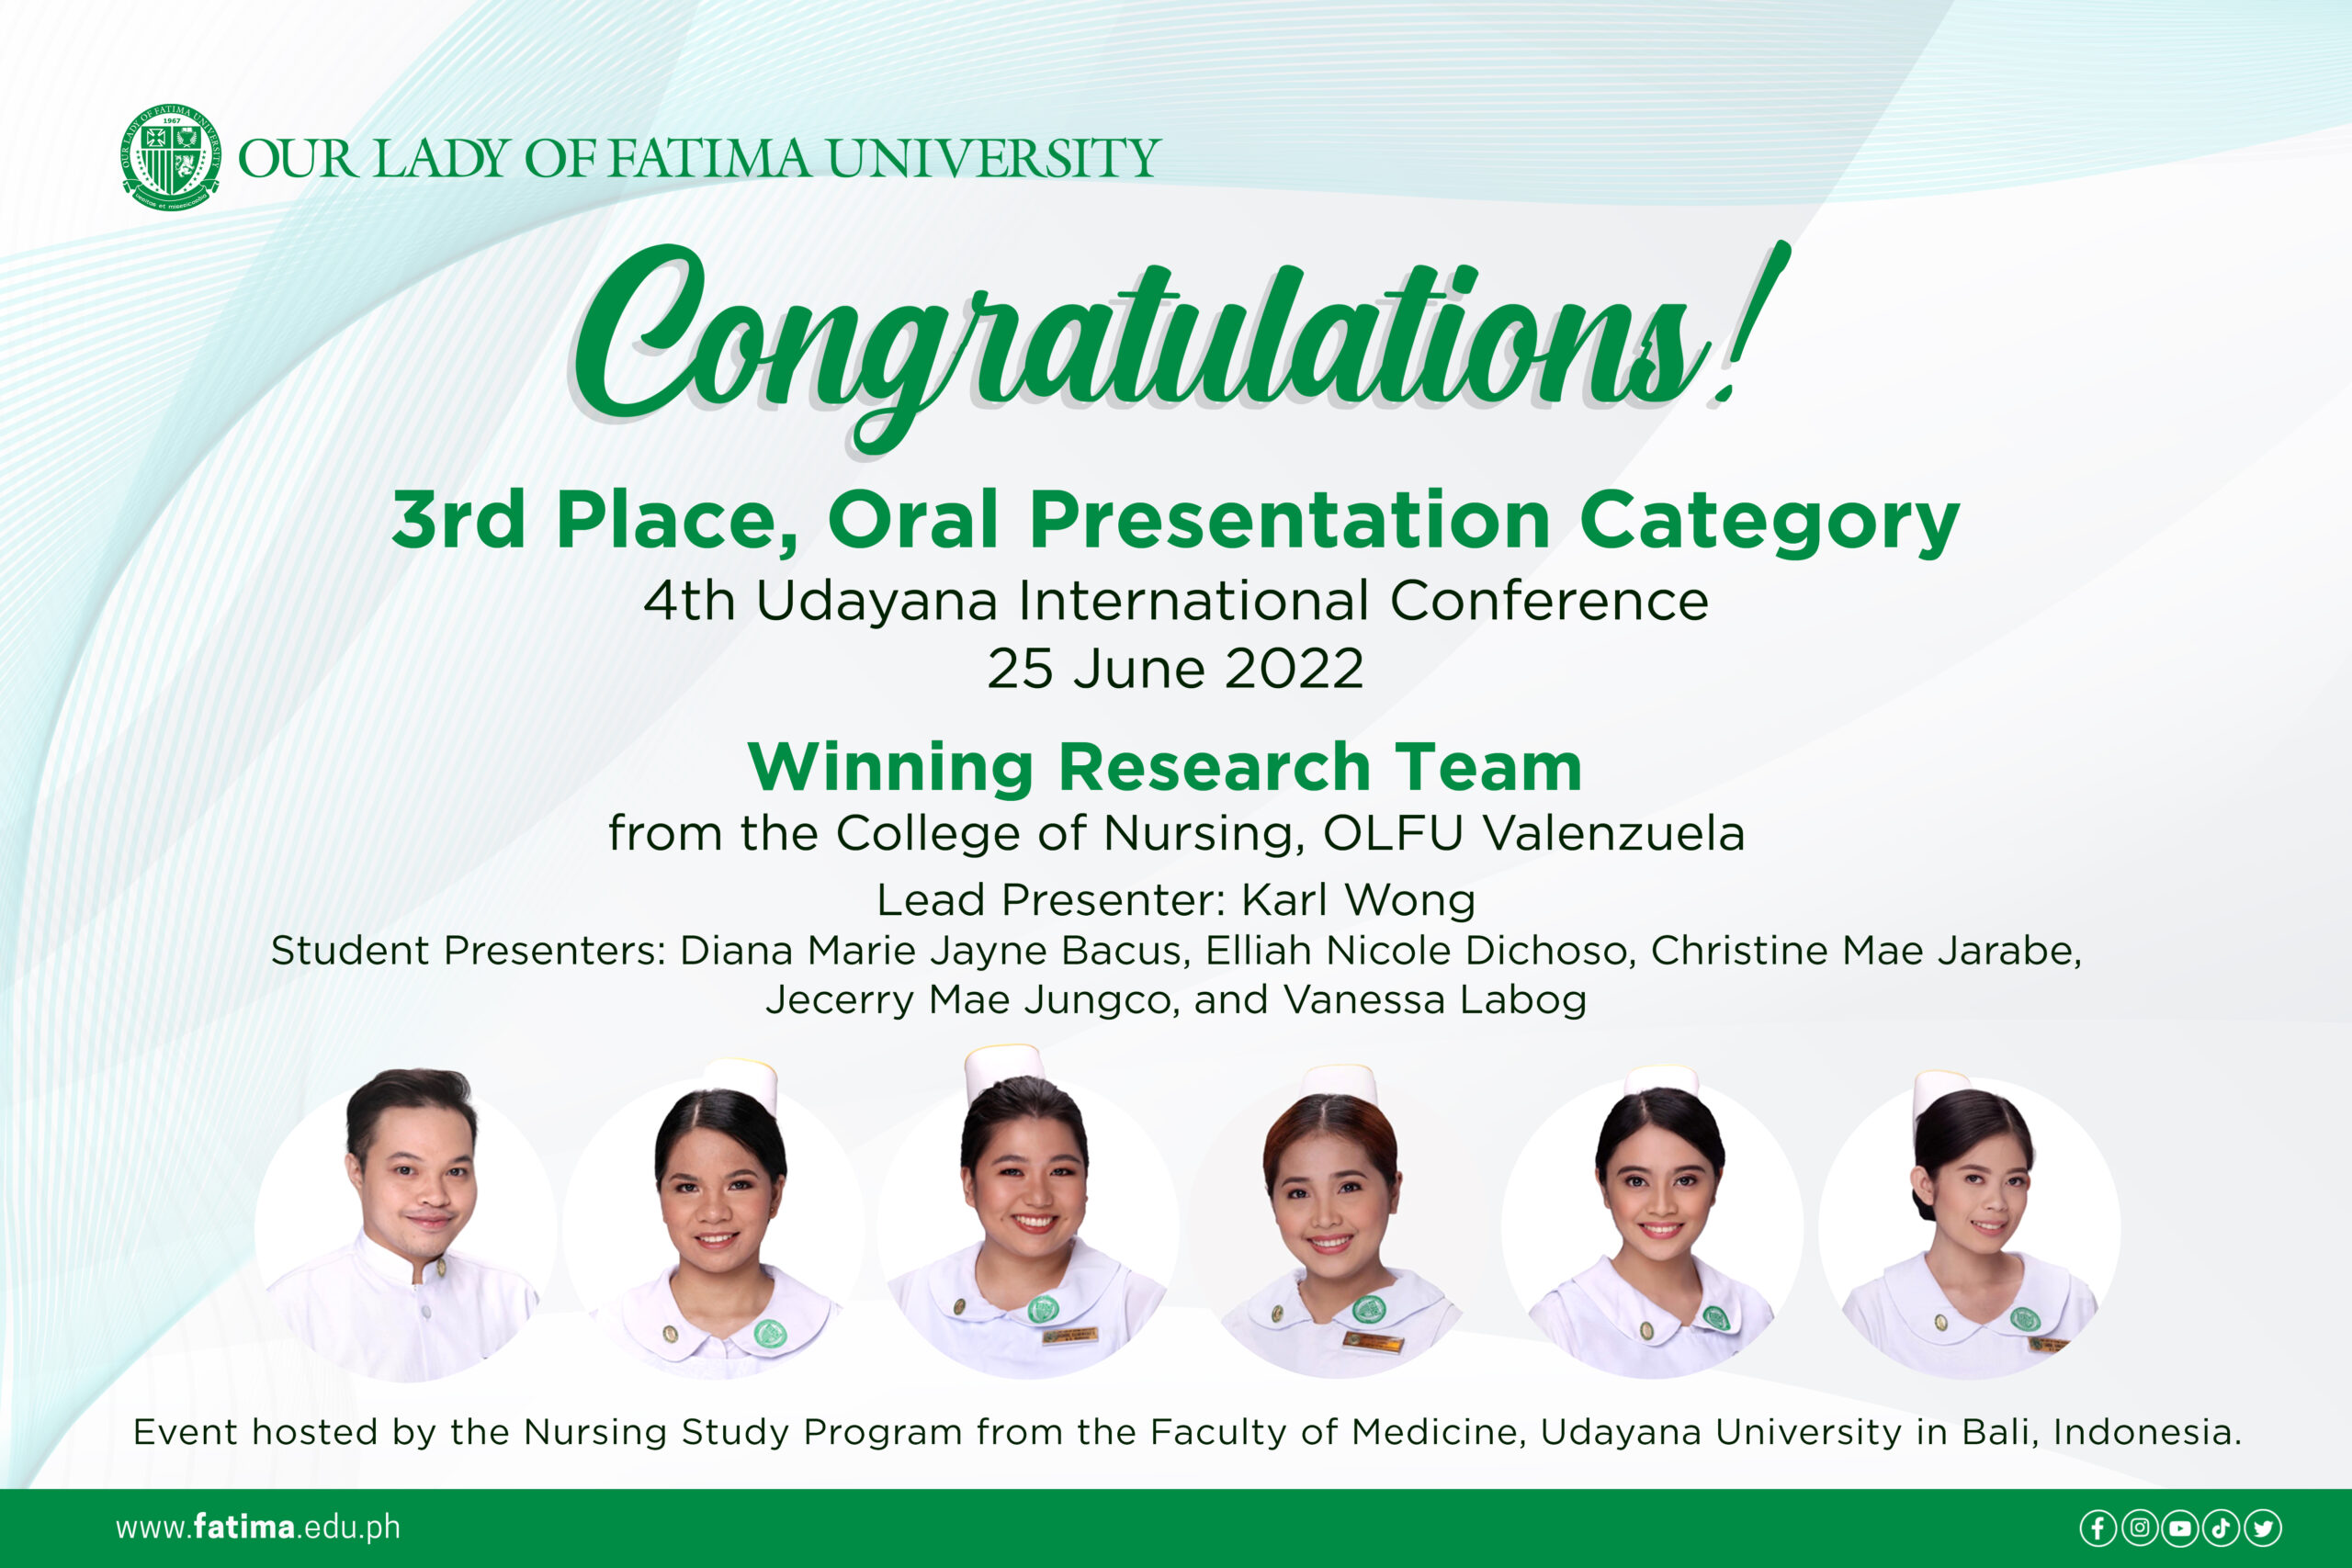 Nursing bags 3rd Place in Udayana International Conference